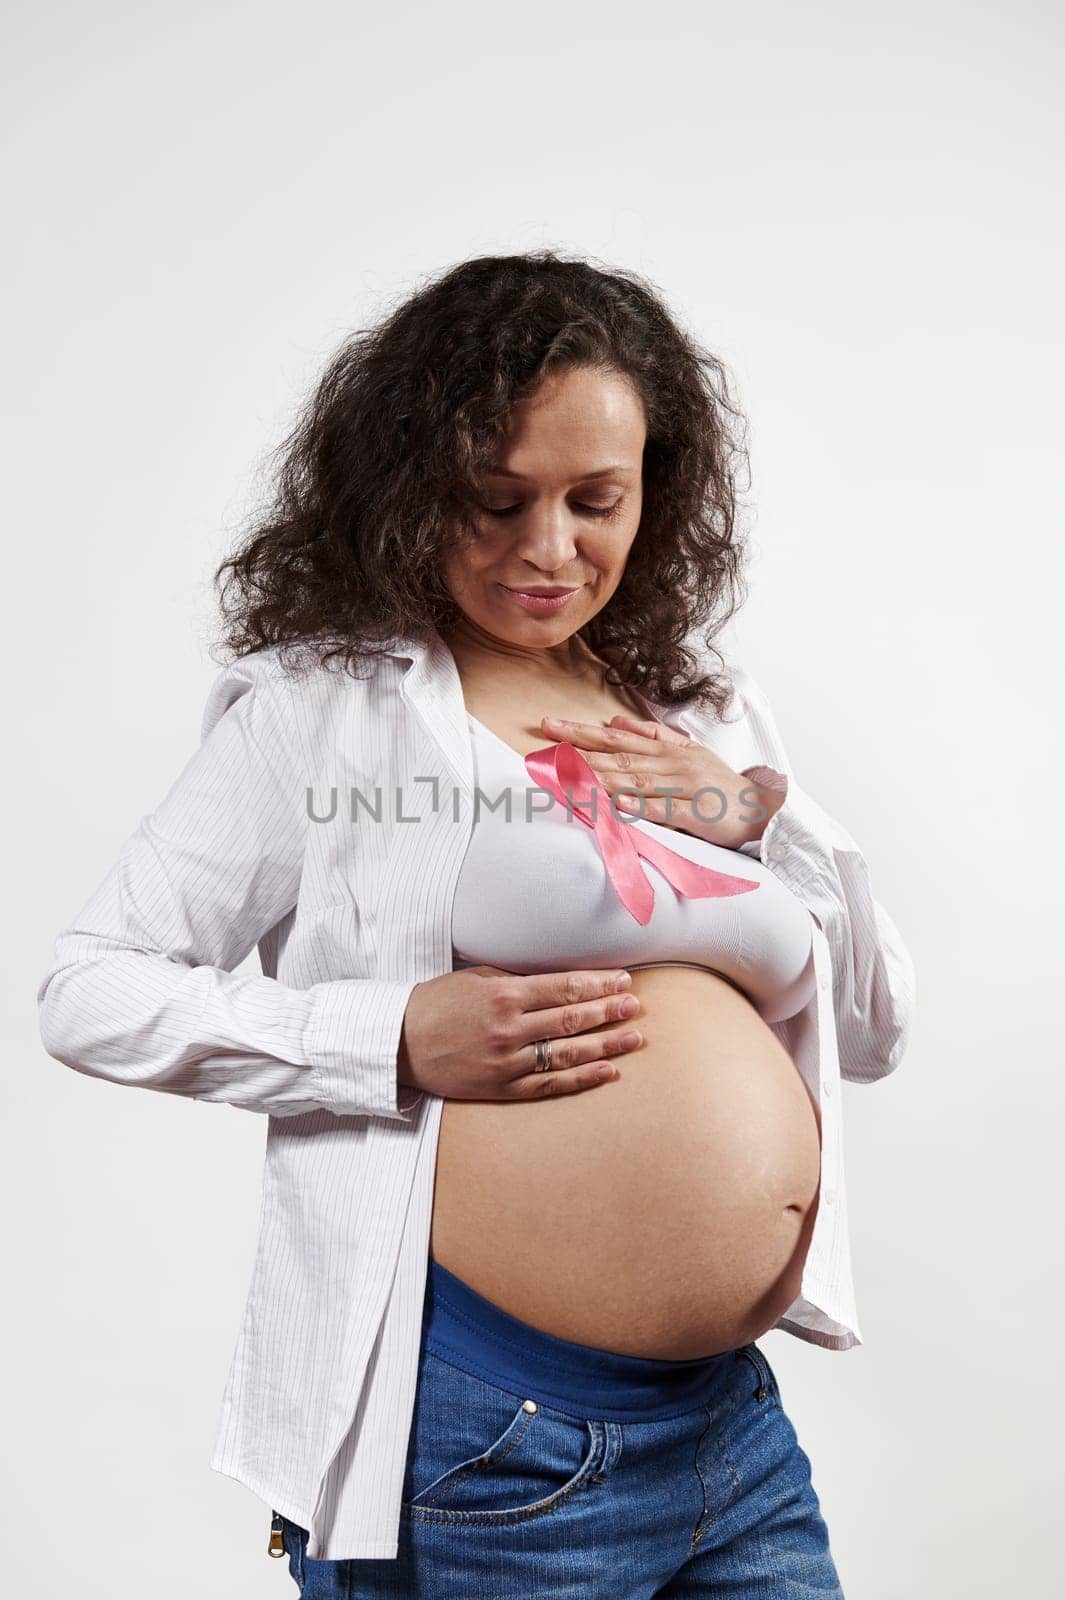 Smiling positive optimistic pregnant woman holding hands on a pink satin ribbon on her underwear, isolated on white background. Pregnancy. World Cancer Day. October 1st. Women's Health. Gynecology